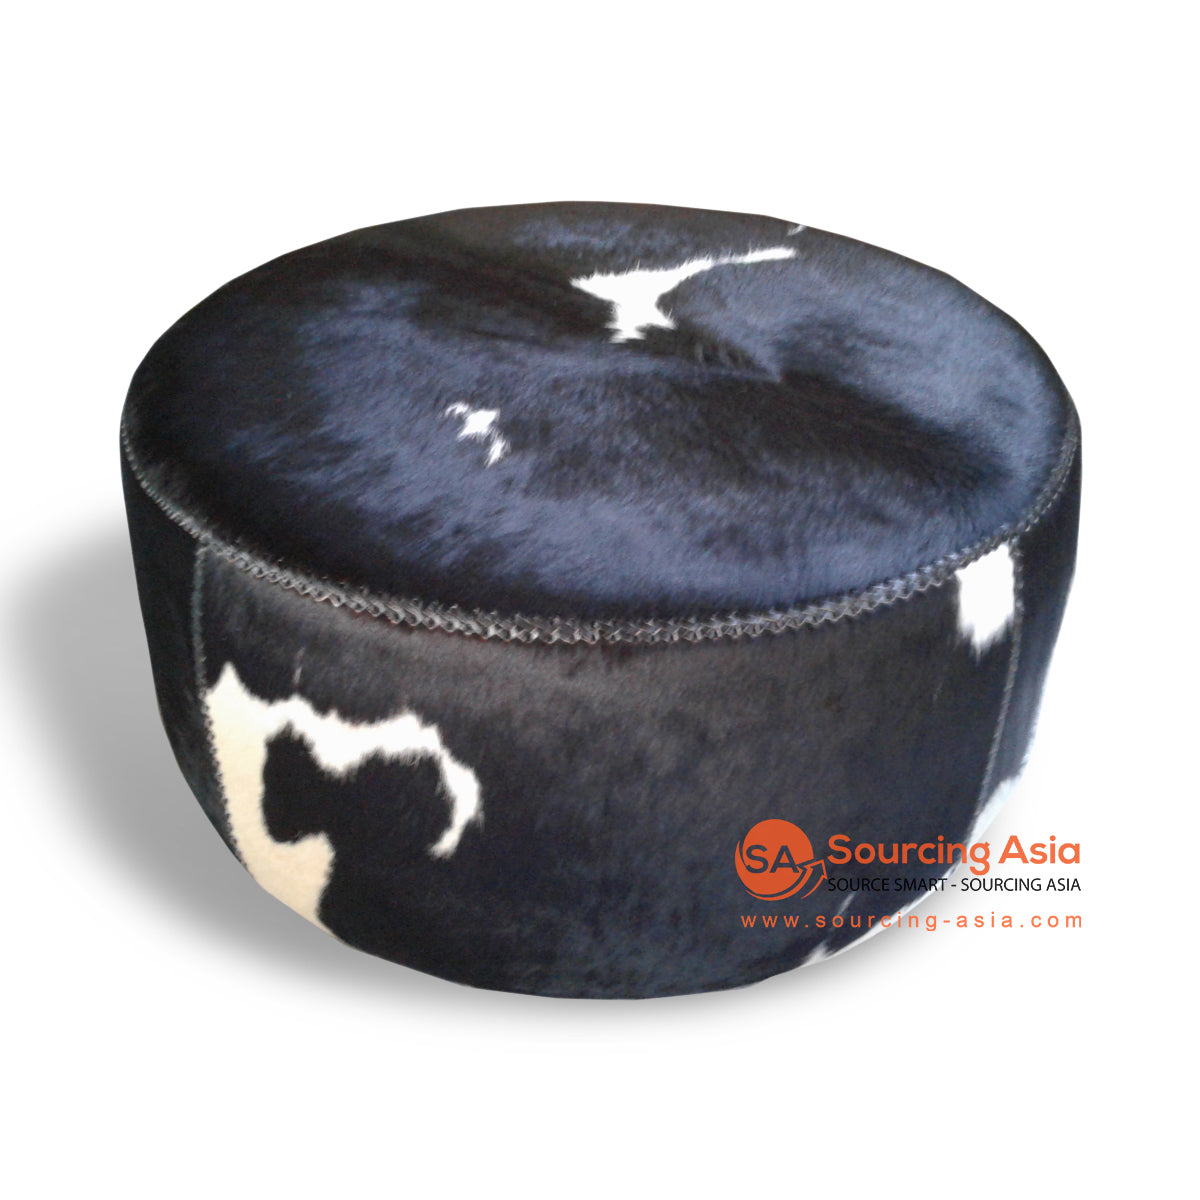 KUSJ007-80BW BLACK AND WHITE SPOT COWHIDE LEATHER ROUND OTTOMAN